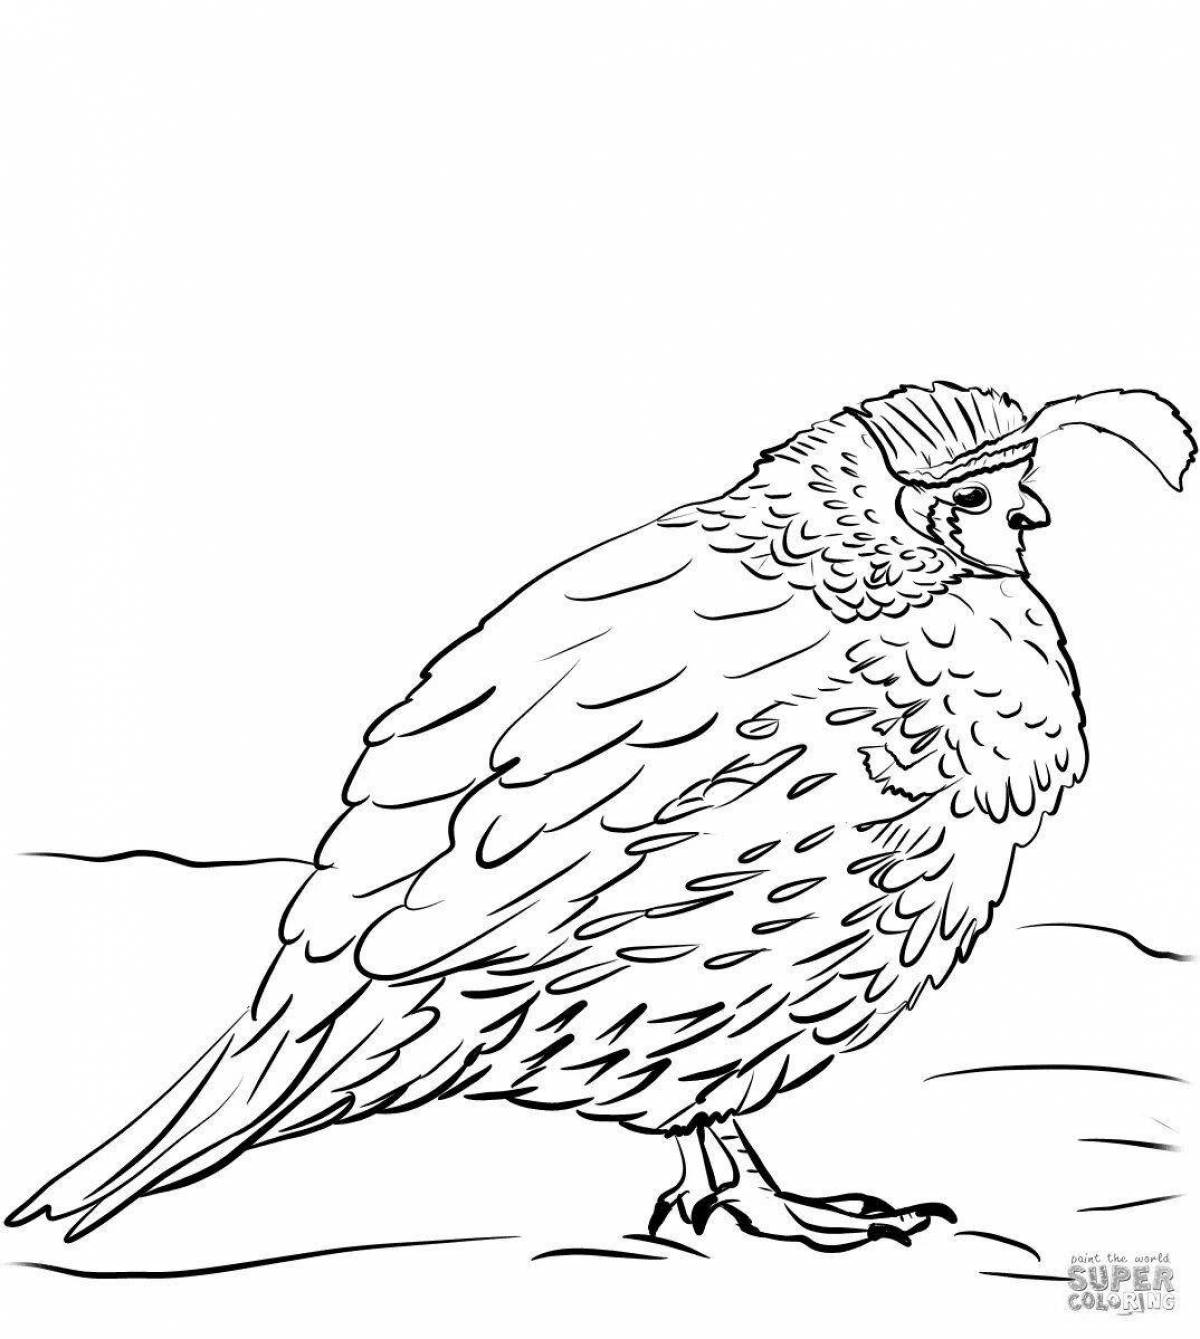 Magic black grouse coloring page